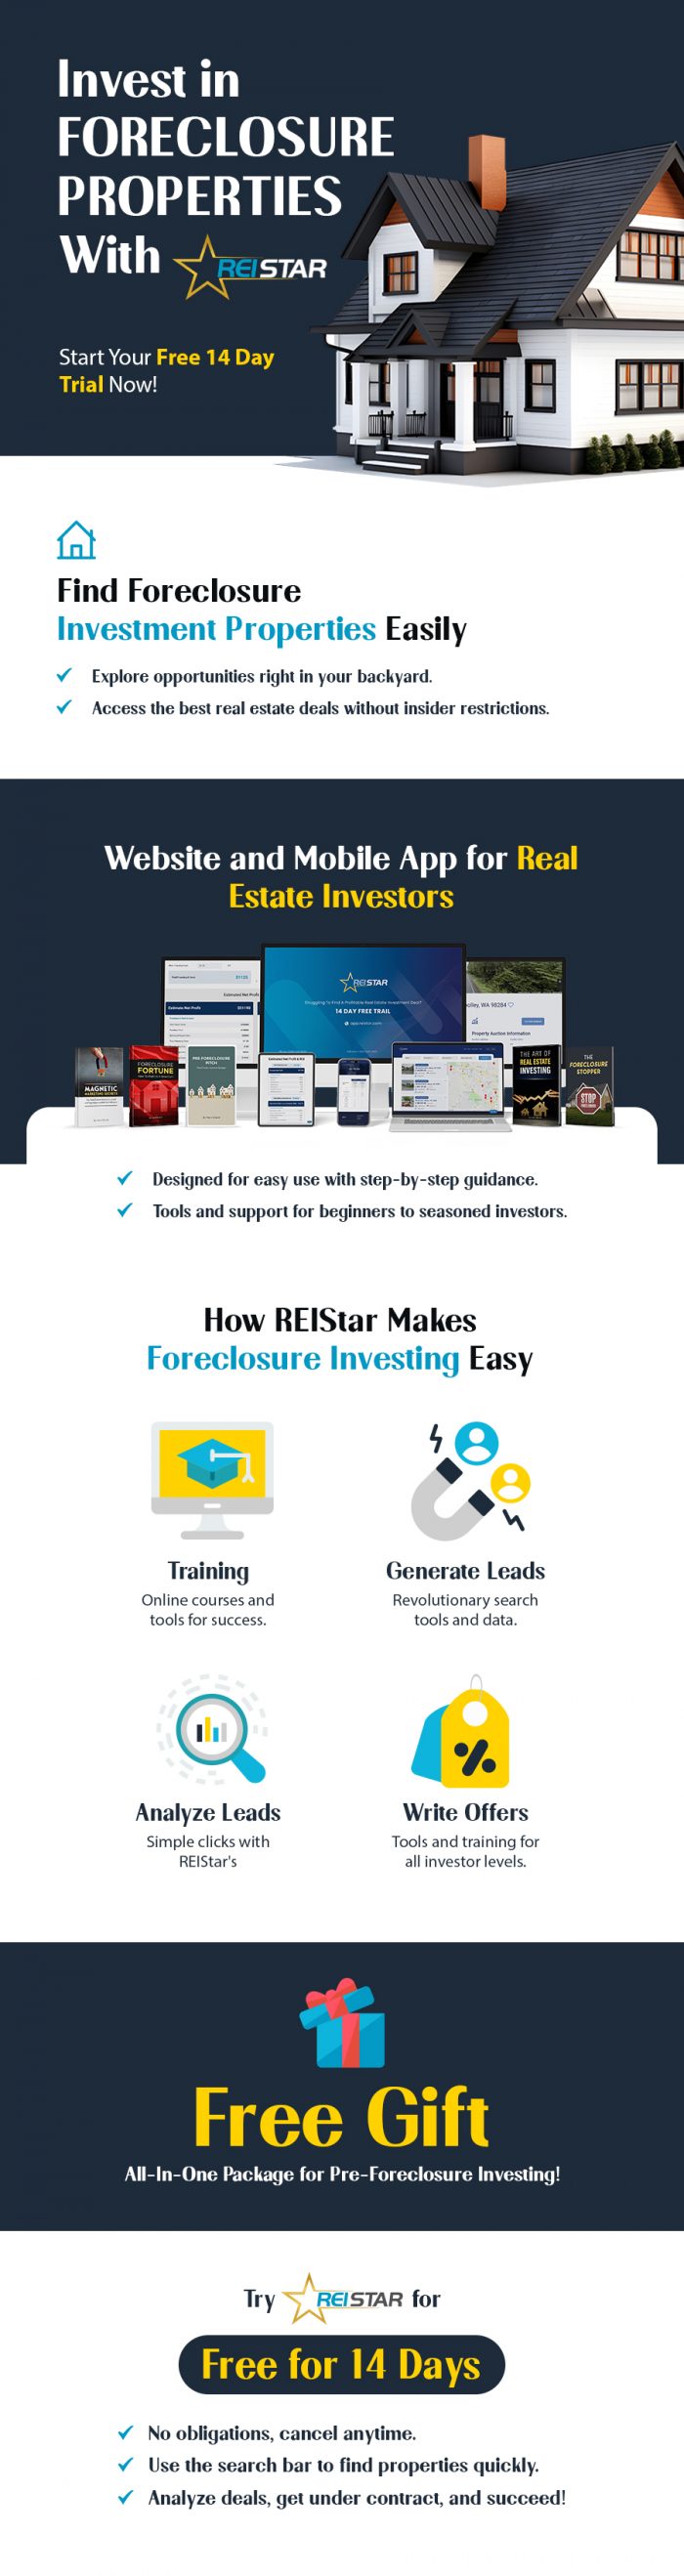 Invest in Foreclosure Properties Easily with REIStar